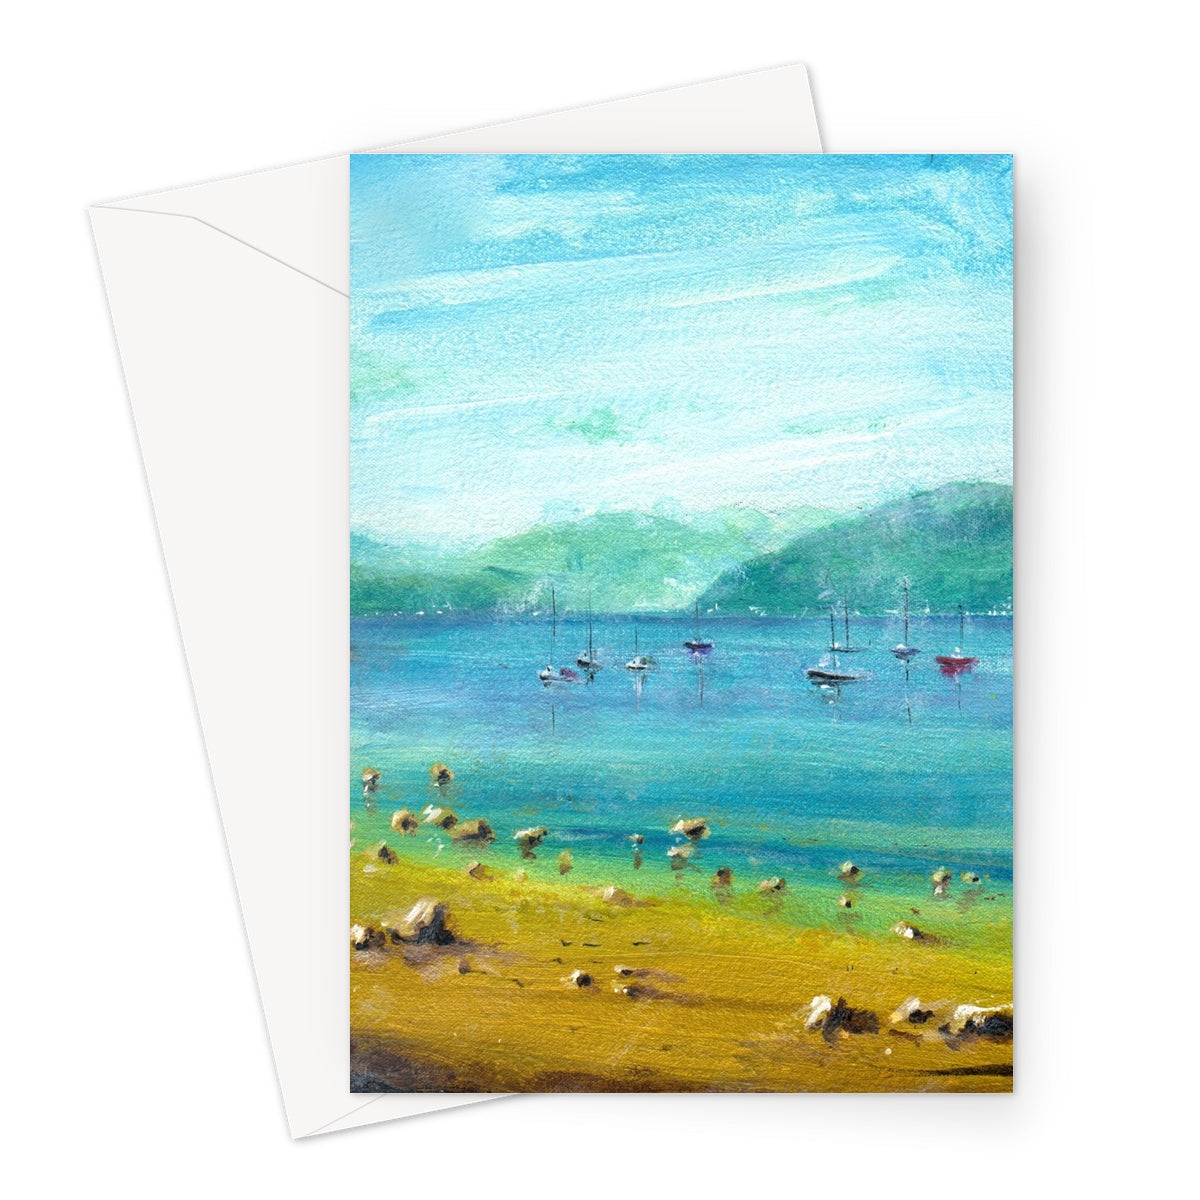 A Clyde Summer Day Art Gifts Greeting Card-Greetings Cards-River Clyde Art Gallery-A5 Portrait-1 Card-Paintings, Prints, Homeware, Art Gifts From Scotland By Scottish Artist Kevin Hunter